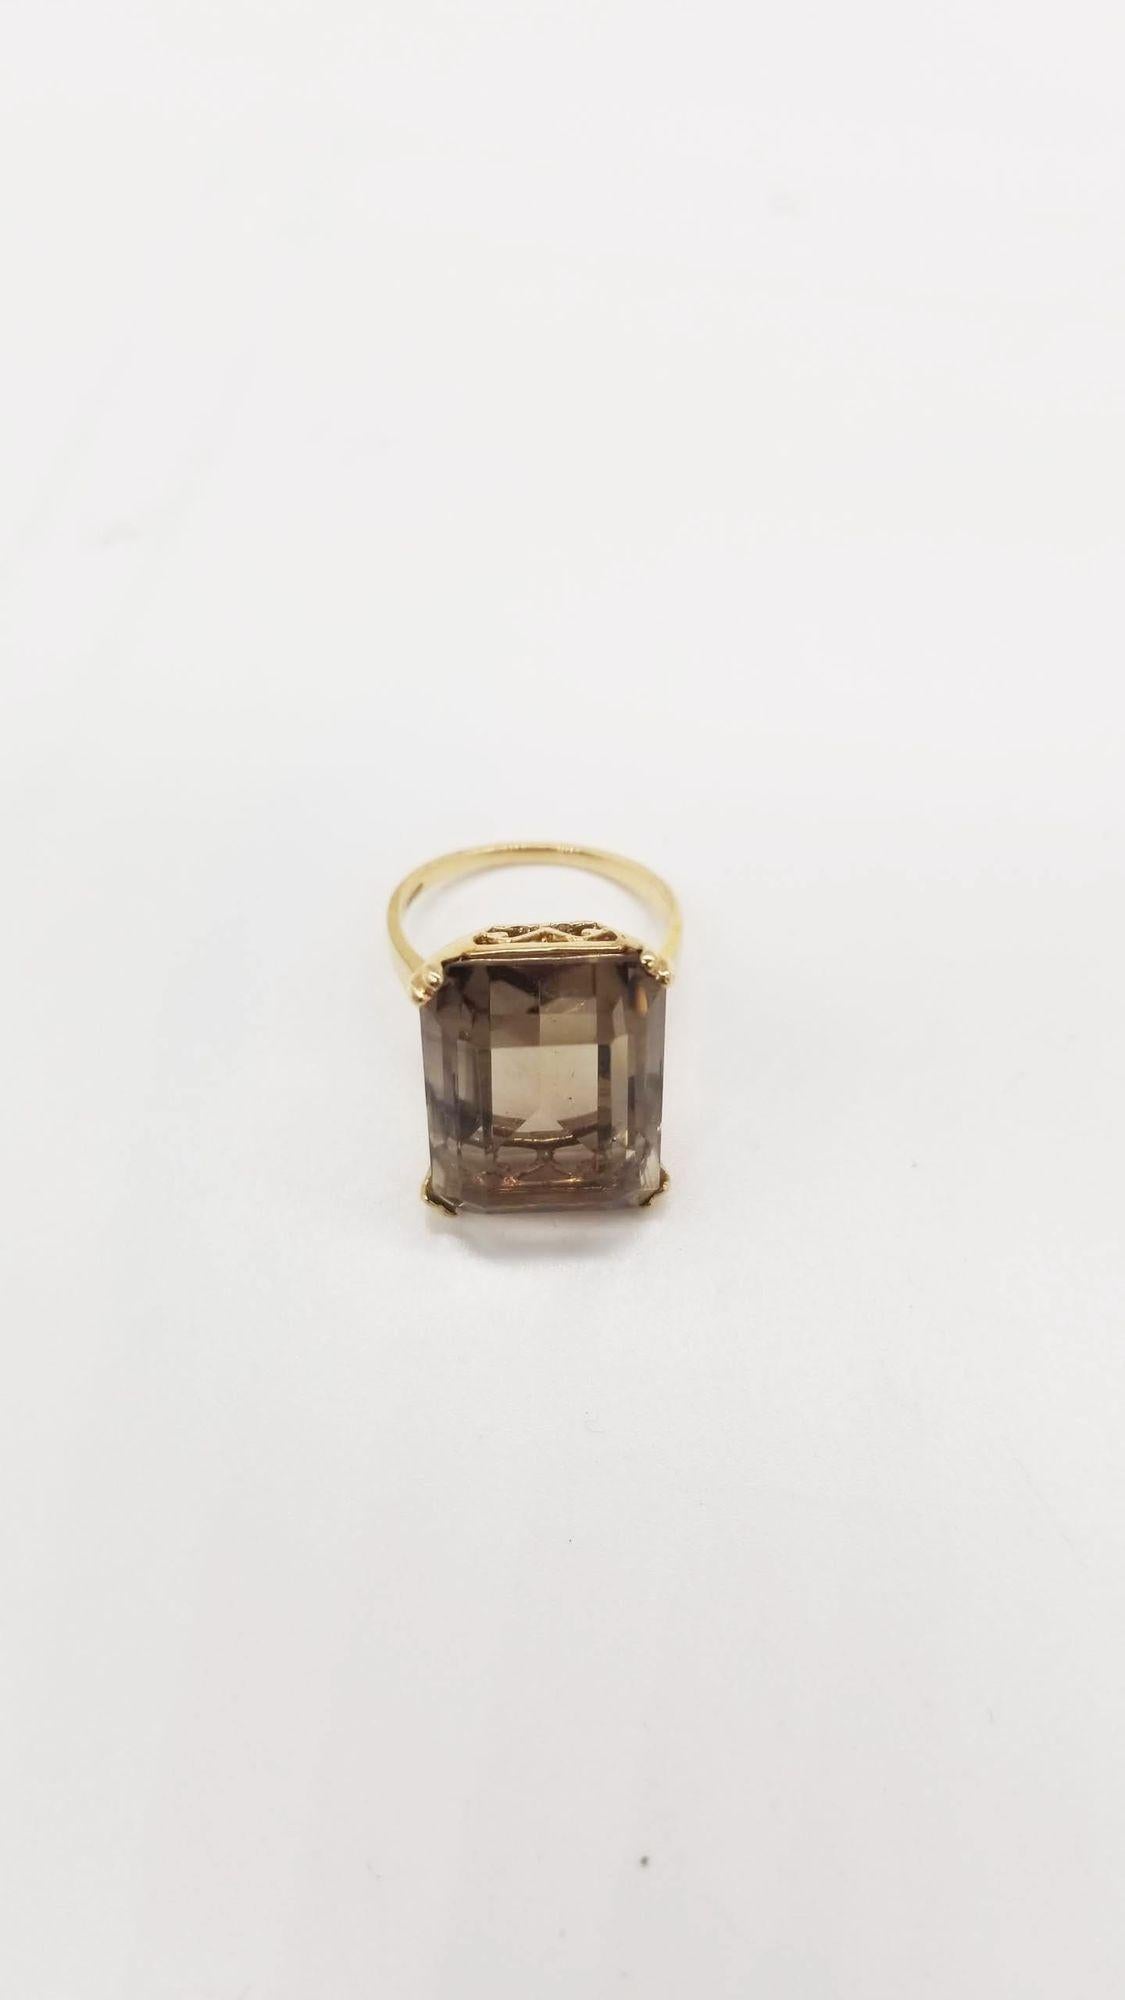 Vintage 14K Yellow Gold Emerald-Cut Smoky Quartz Cocktail Ring Size 5 In Excellent Condition For Sale In Van Nuys, CA